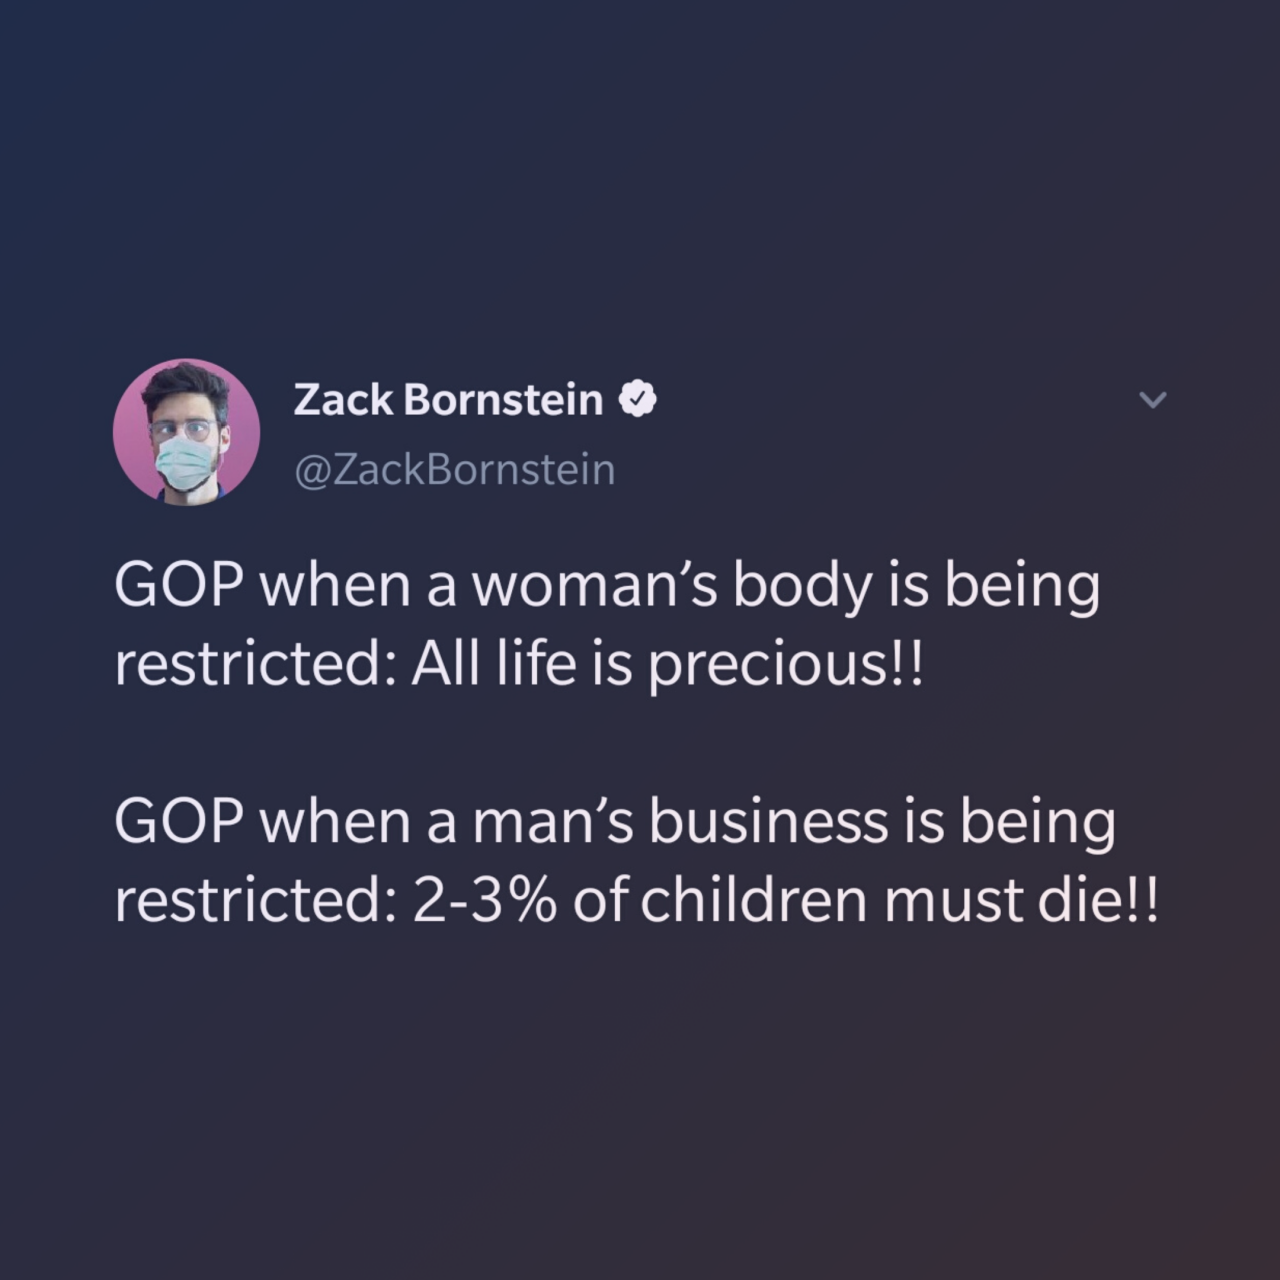 sky - Zack Bornstein Gop when a woman's body is being restricted All life is precious!! Gop when a man's business is being restricted 23% of children must die!!